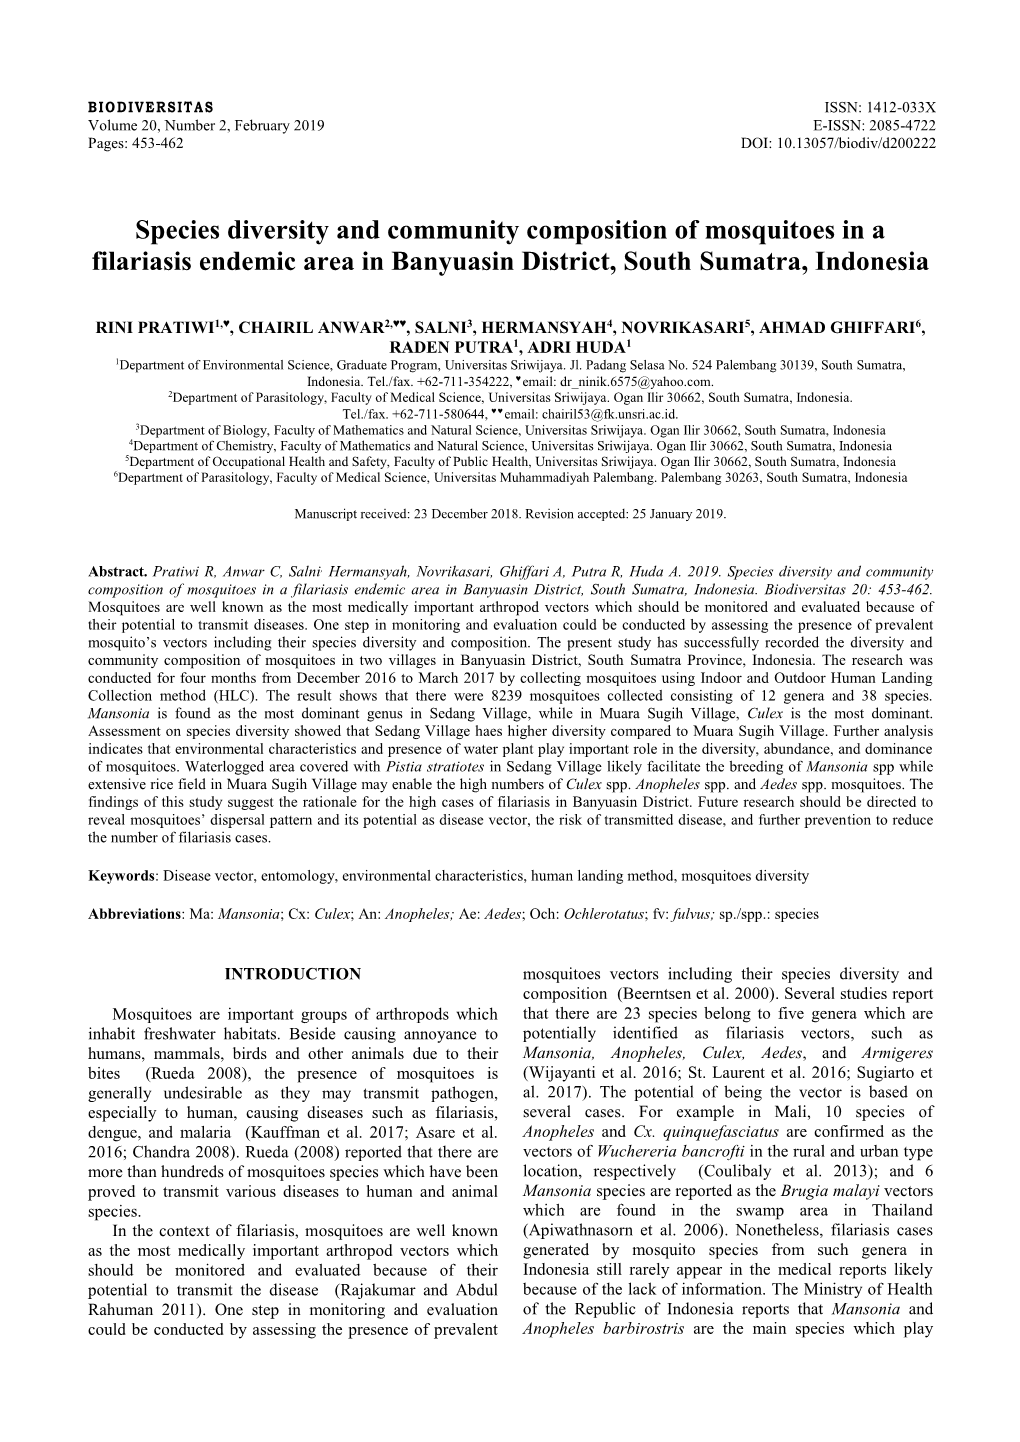 Species Diversity and Community Composition of Mosquitoes in a Filariasis Endemic Area in Banyuasin District, South Sumatra, Indonesia